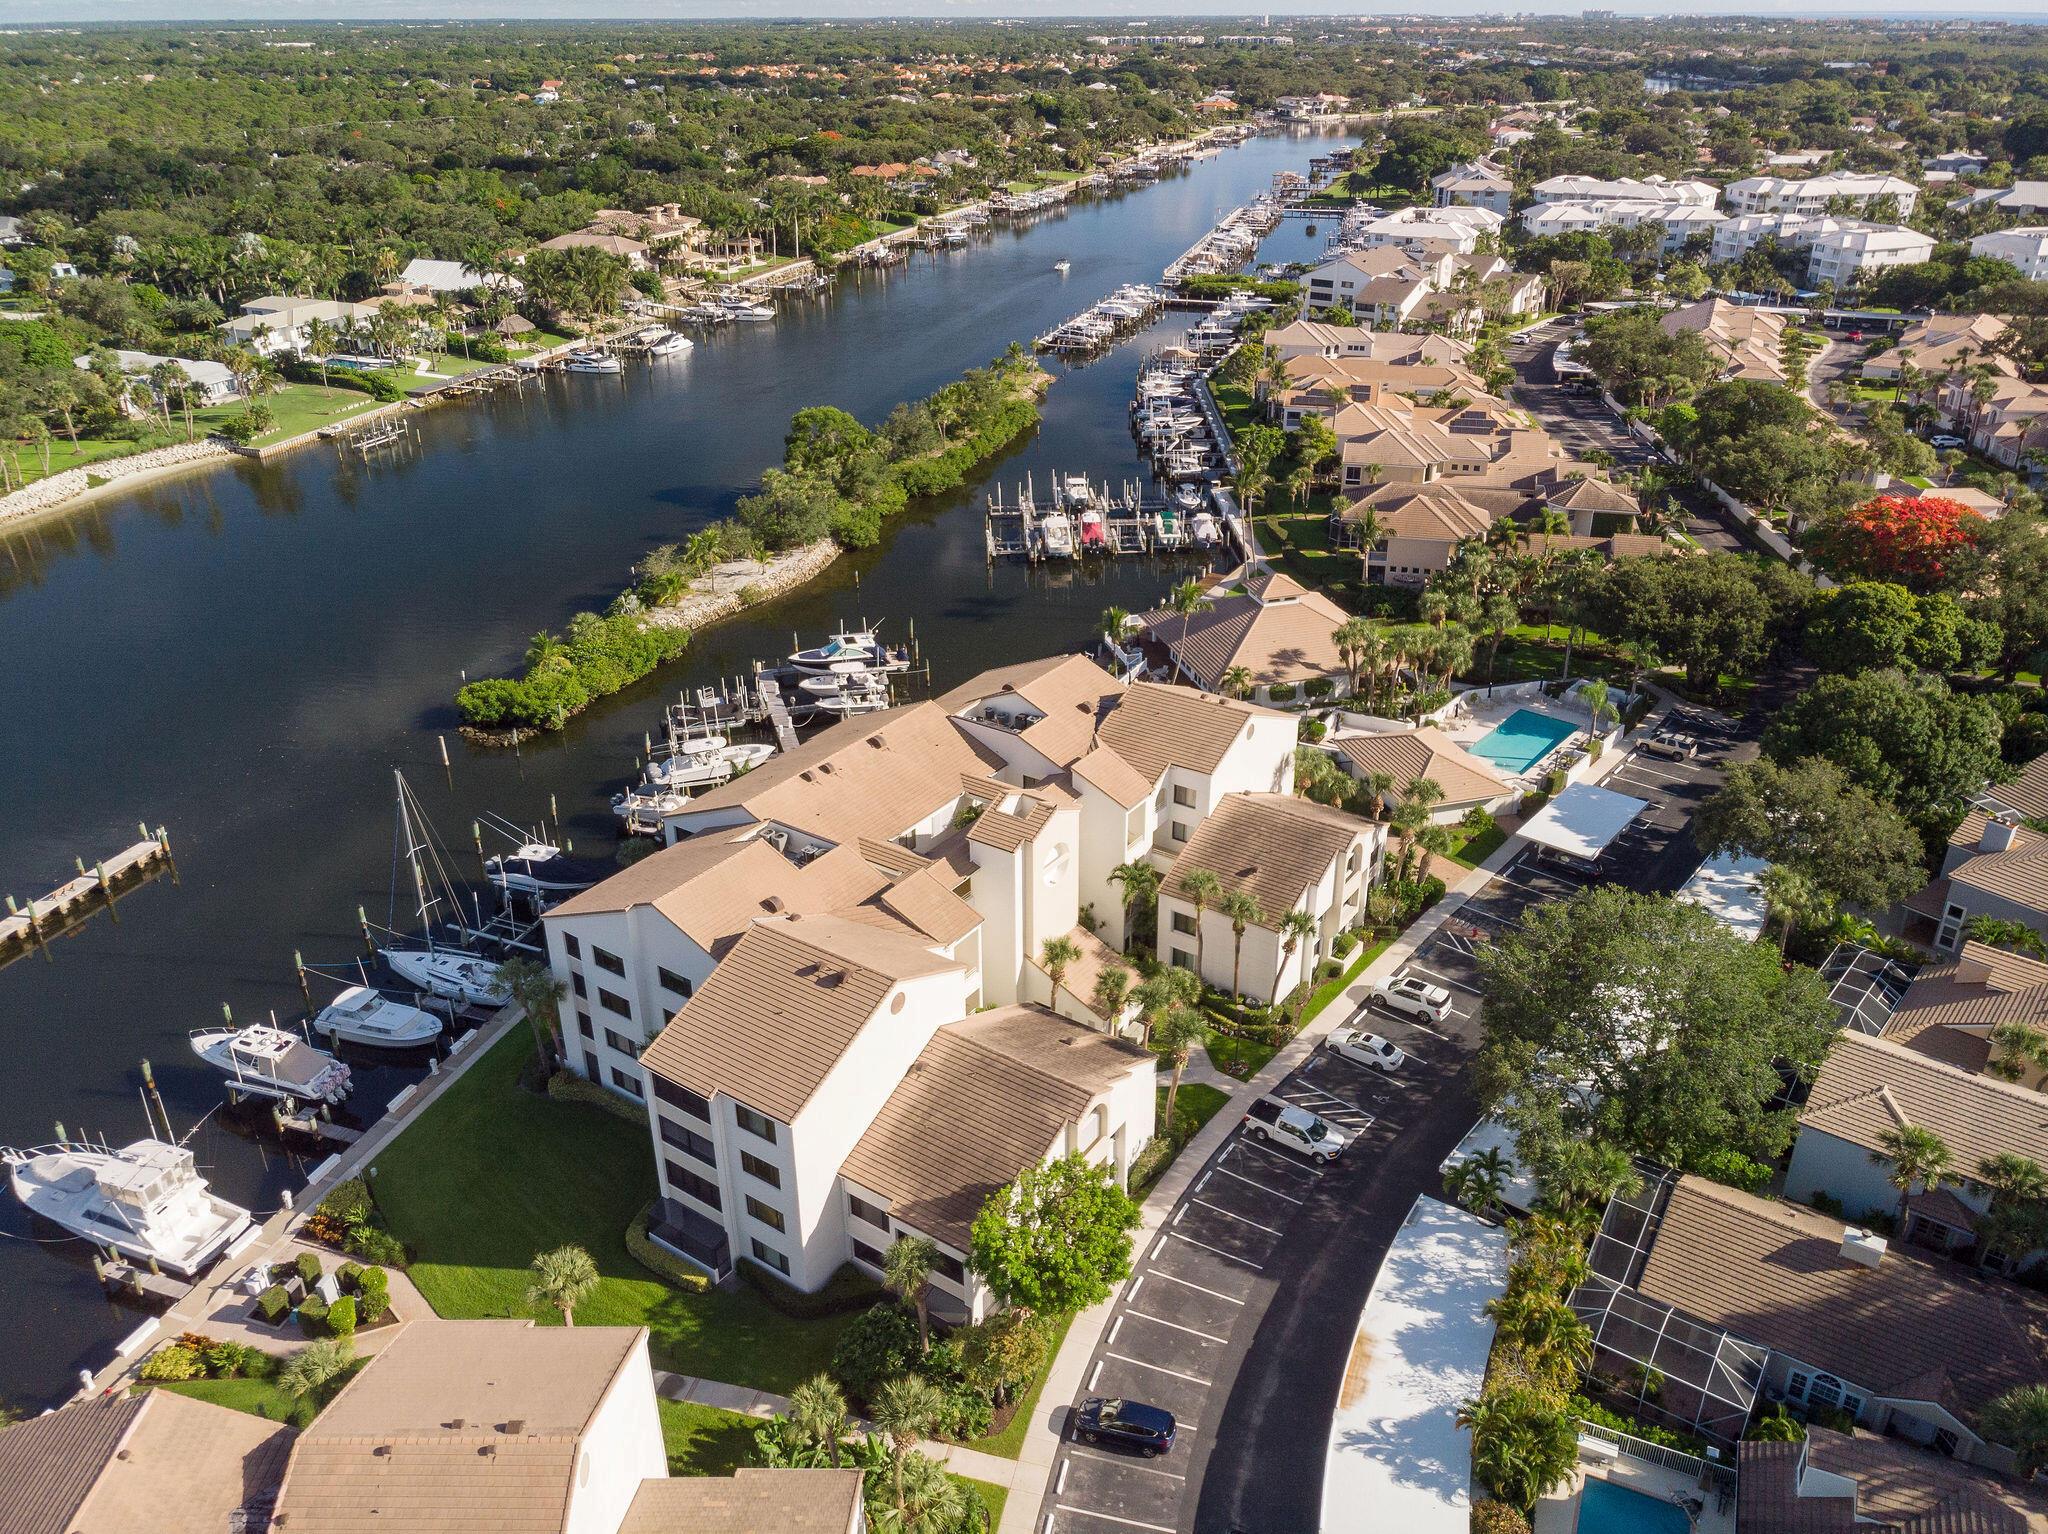 Fully renovated 2-bed,2-bath second-floor condo.DIRECT panoramic intracoastal views.Watch yachts sail & spectacular sunsets.New flooring throughout flows to the open living & dining areas.Remodeled kitchen features new cabinets,quartz countertops & stainless steel appliances. The spacious primary suite offers a resort-style bathroom.Large guest bedroom on the opposite side provides privacy.A glassed private patio with sliding windows extends your living space. Includes full washer/dryer,covered carport,storage,upgraded cable & internet.Oak Harbour is a gated boutique community directly on the intracoastal with lush landscaping.On-site management,clubhouse overlooking the waterway & marina,2 heated pools,tennis/pickleball,BBQ area,Gym.Boat slips available for lease/purchase.Close to beach